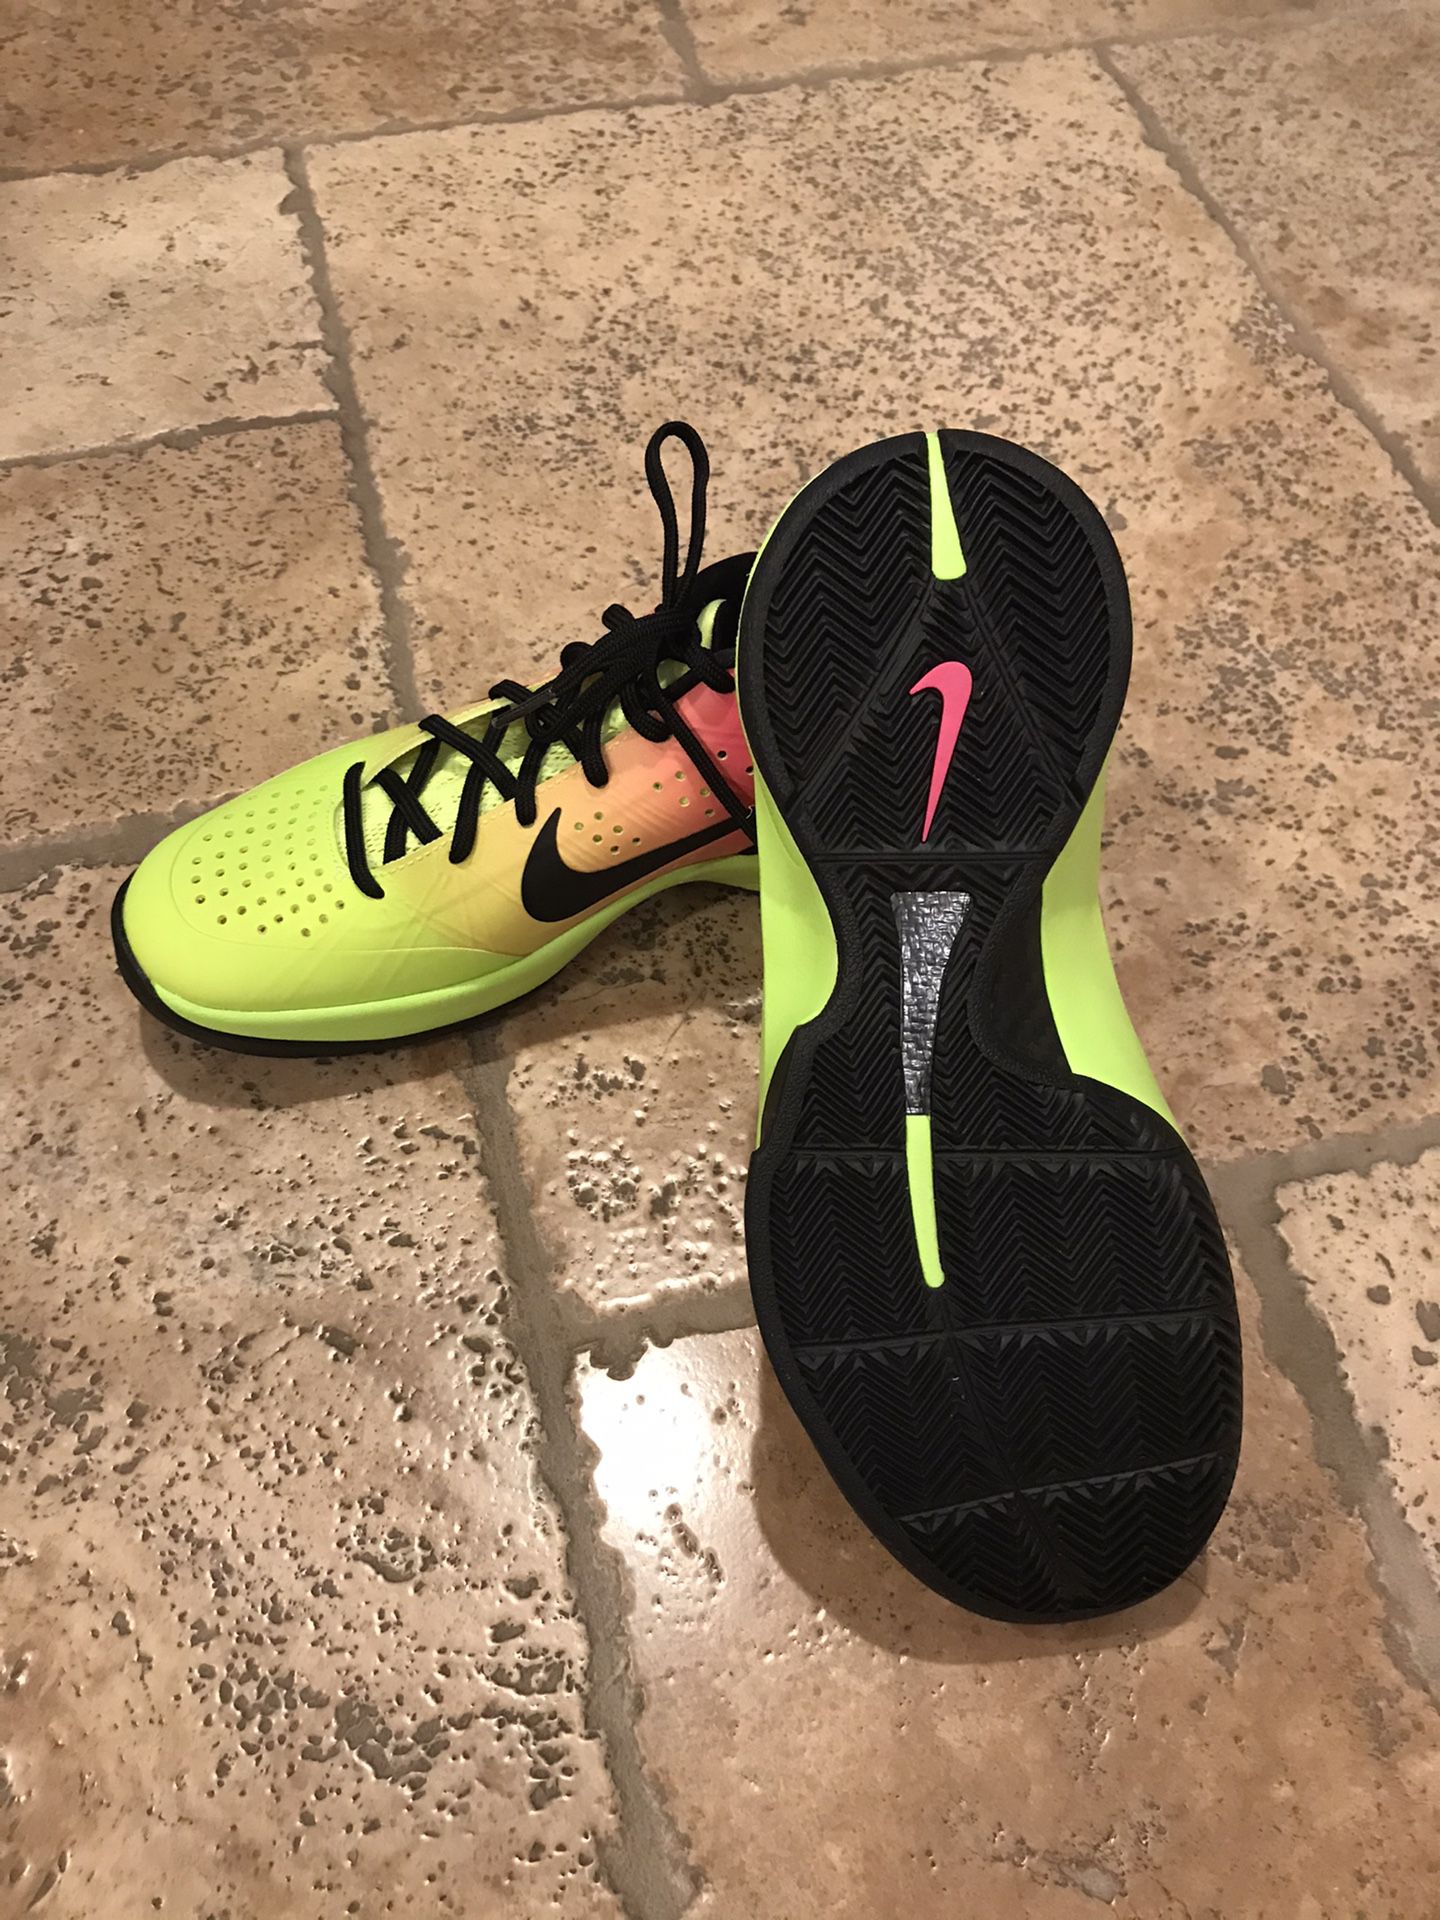 Nike Zoom Hyperattack 8 for Sale in Huntington Beach, CA - OfferUp